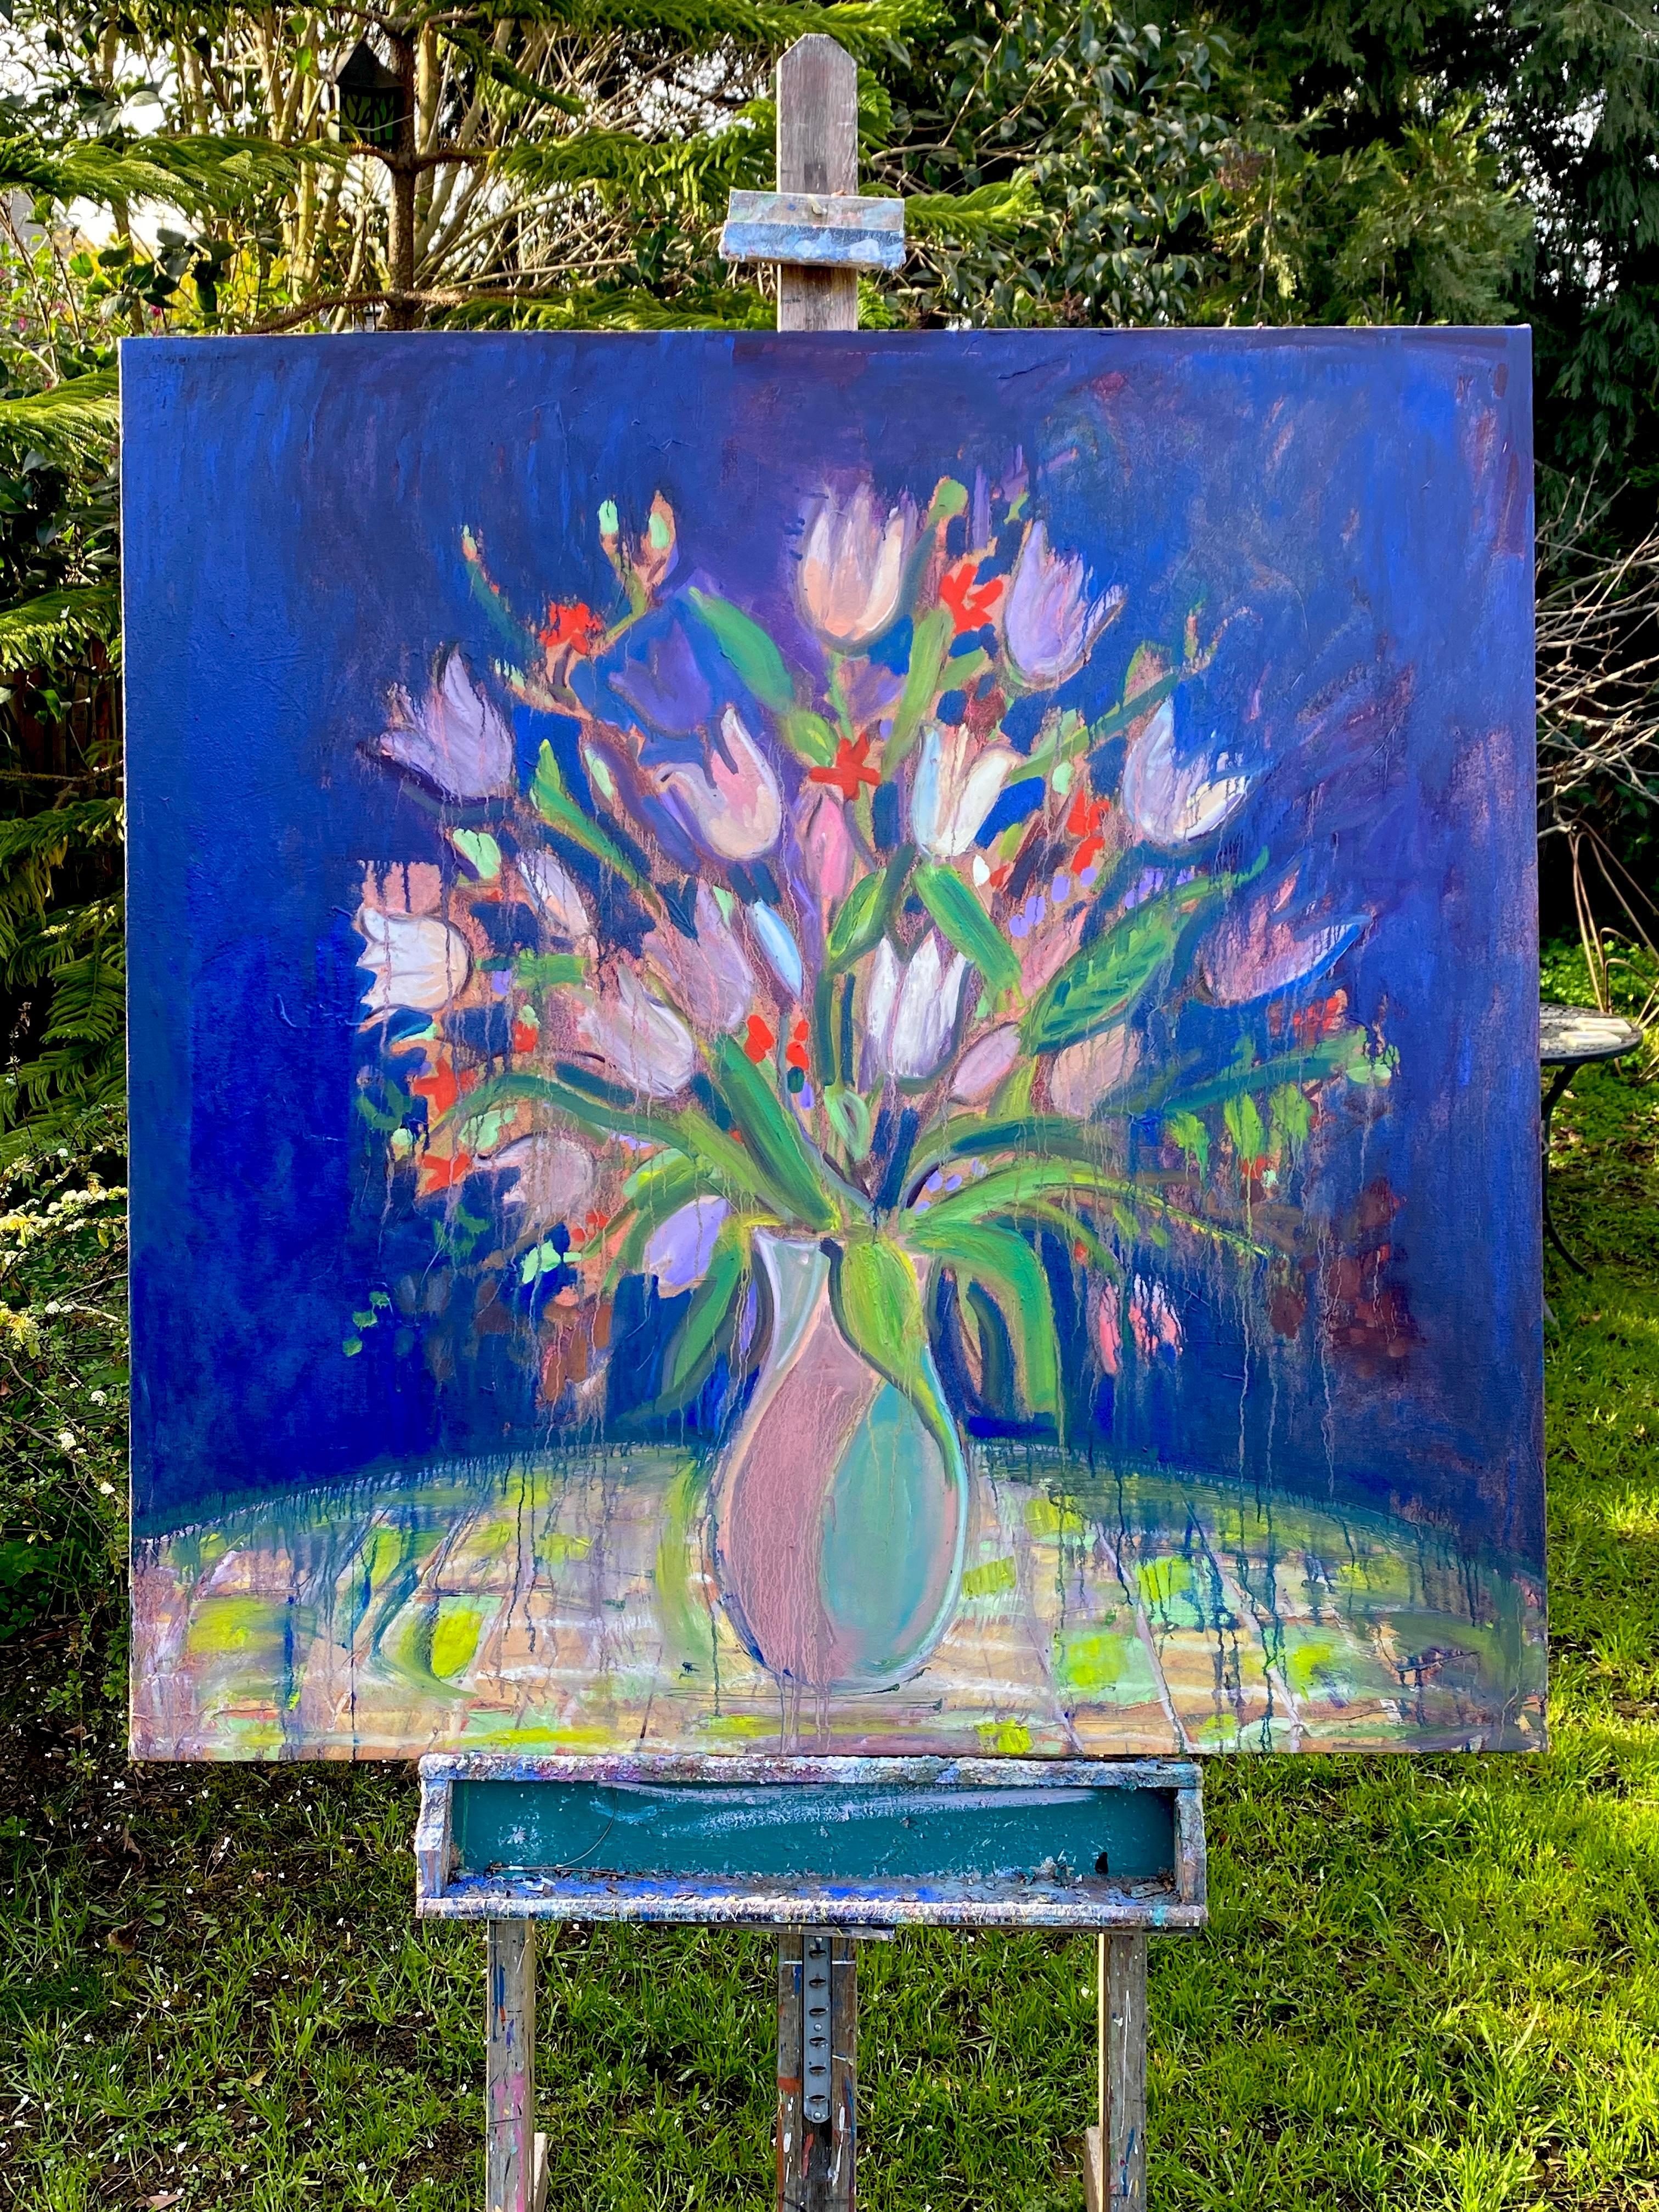 <p>Artist Comments<br>Artist James Hartman paints an expressionist still life of vibrant blooming tulips arranged in a teal and purple vase. James shows his love for street art influenced by a visit to a show of Basquiat and Keith Haring at the